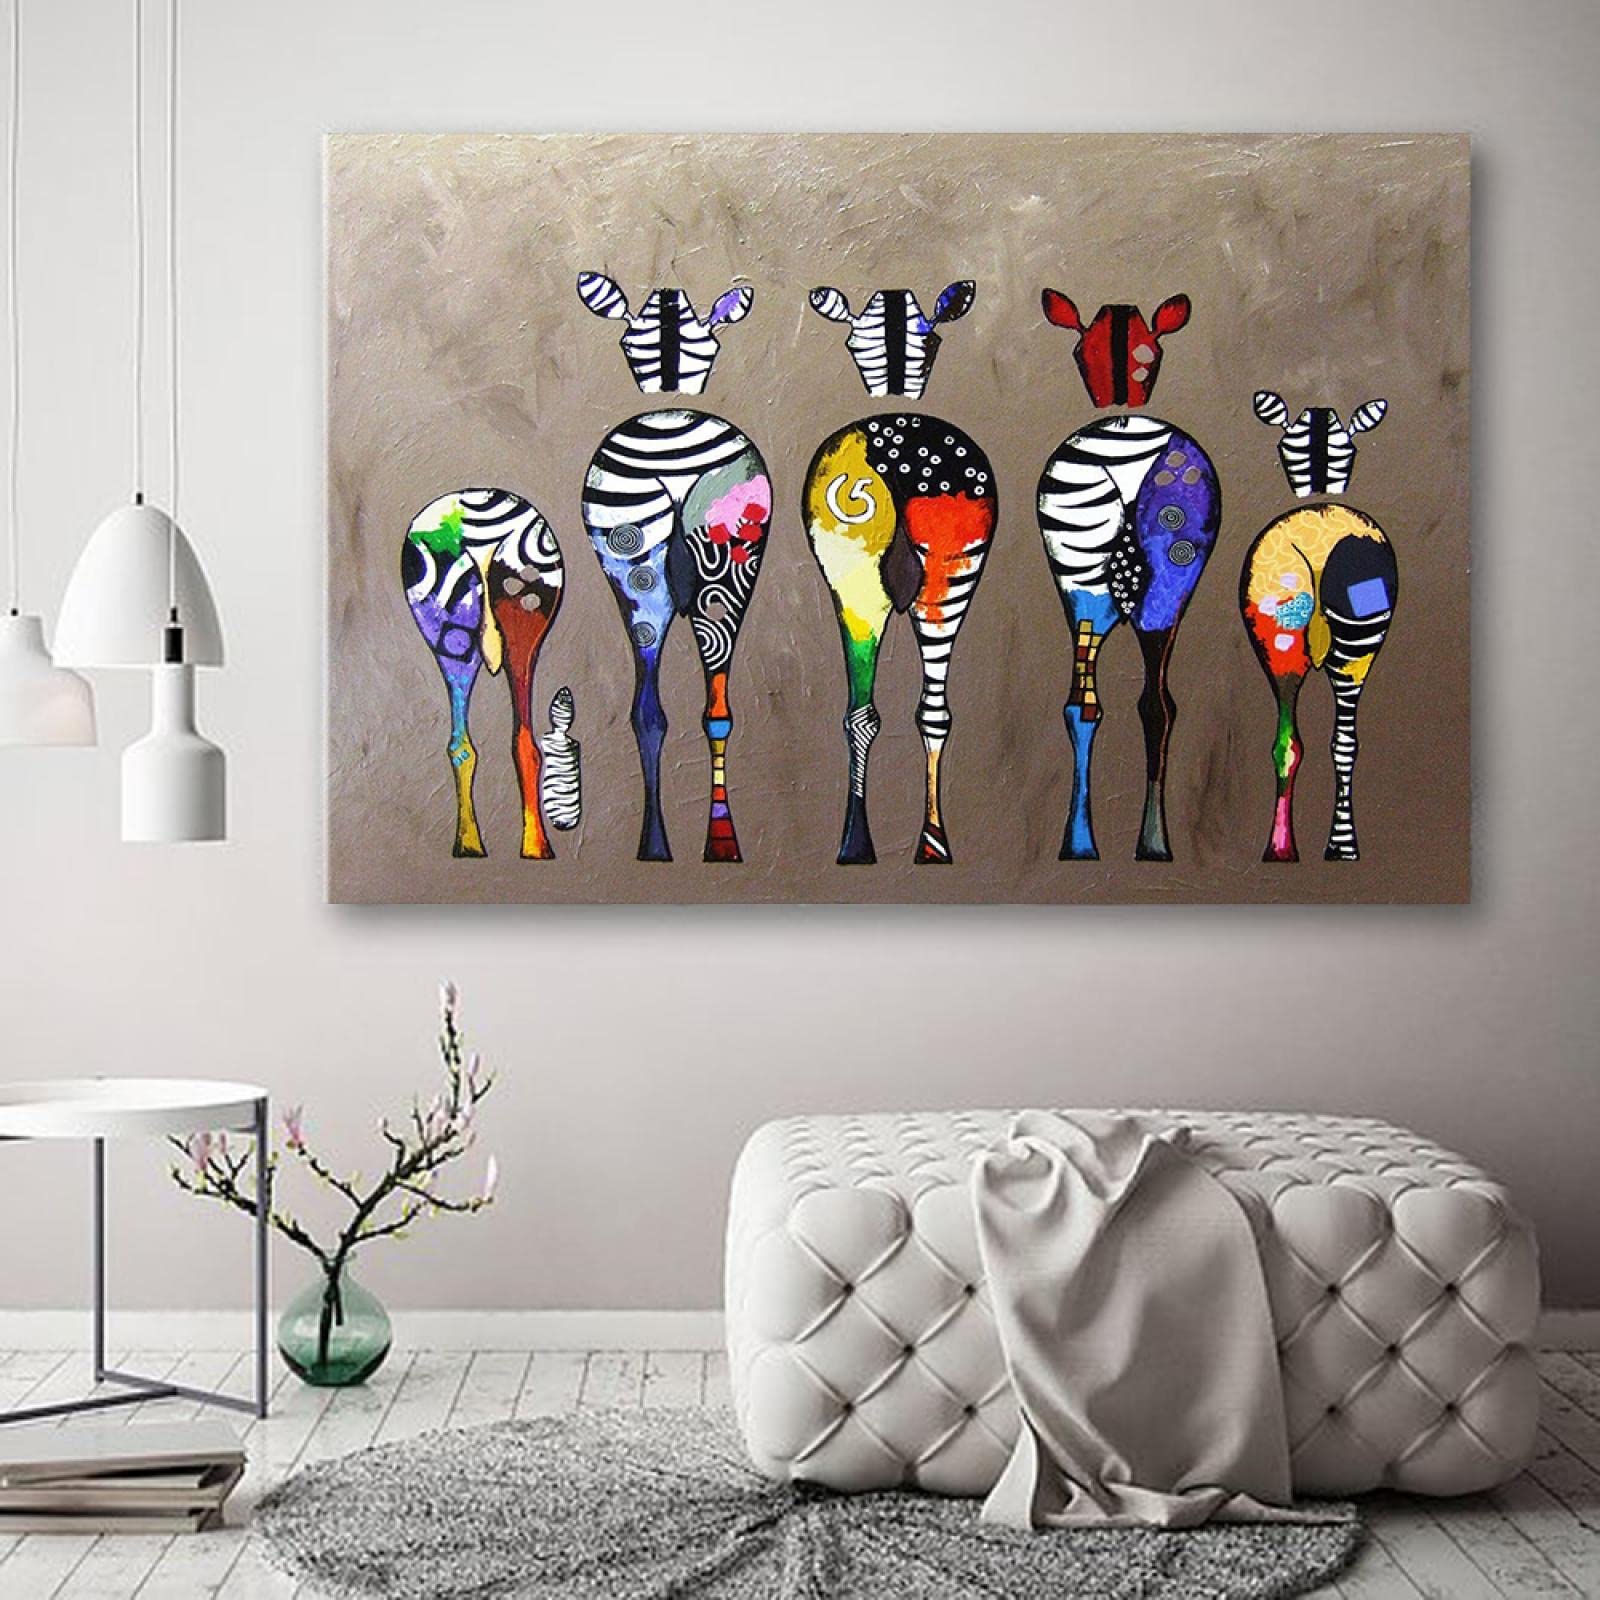 Art Canvas Prints Cartoon Colorful Zebra Butt Abstract Animal Wall Painting Modern Living Room Home Decor Poster Pictures 60x90cm(24x35in Frameless